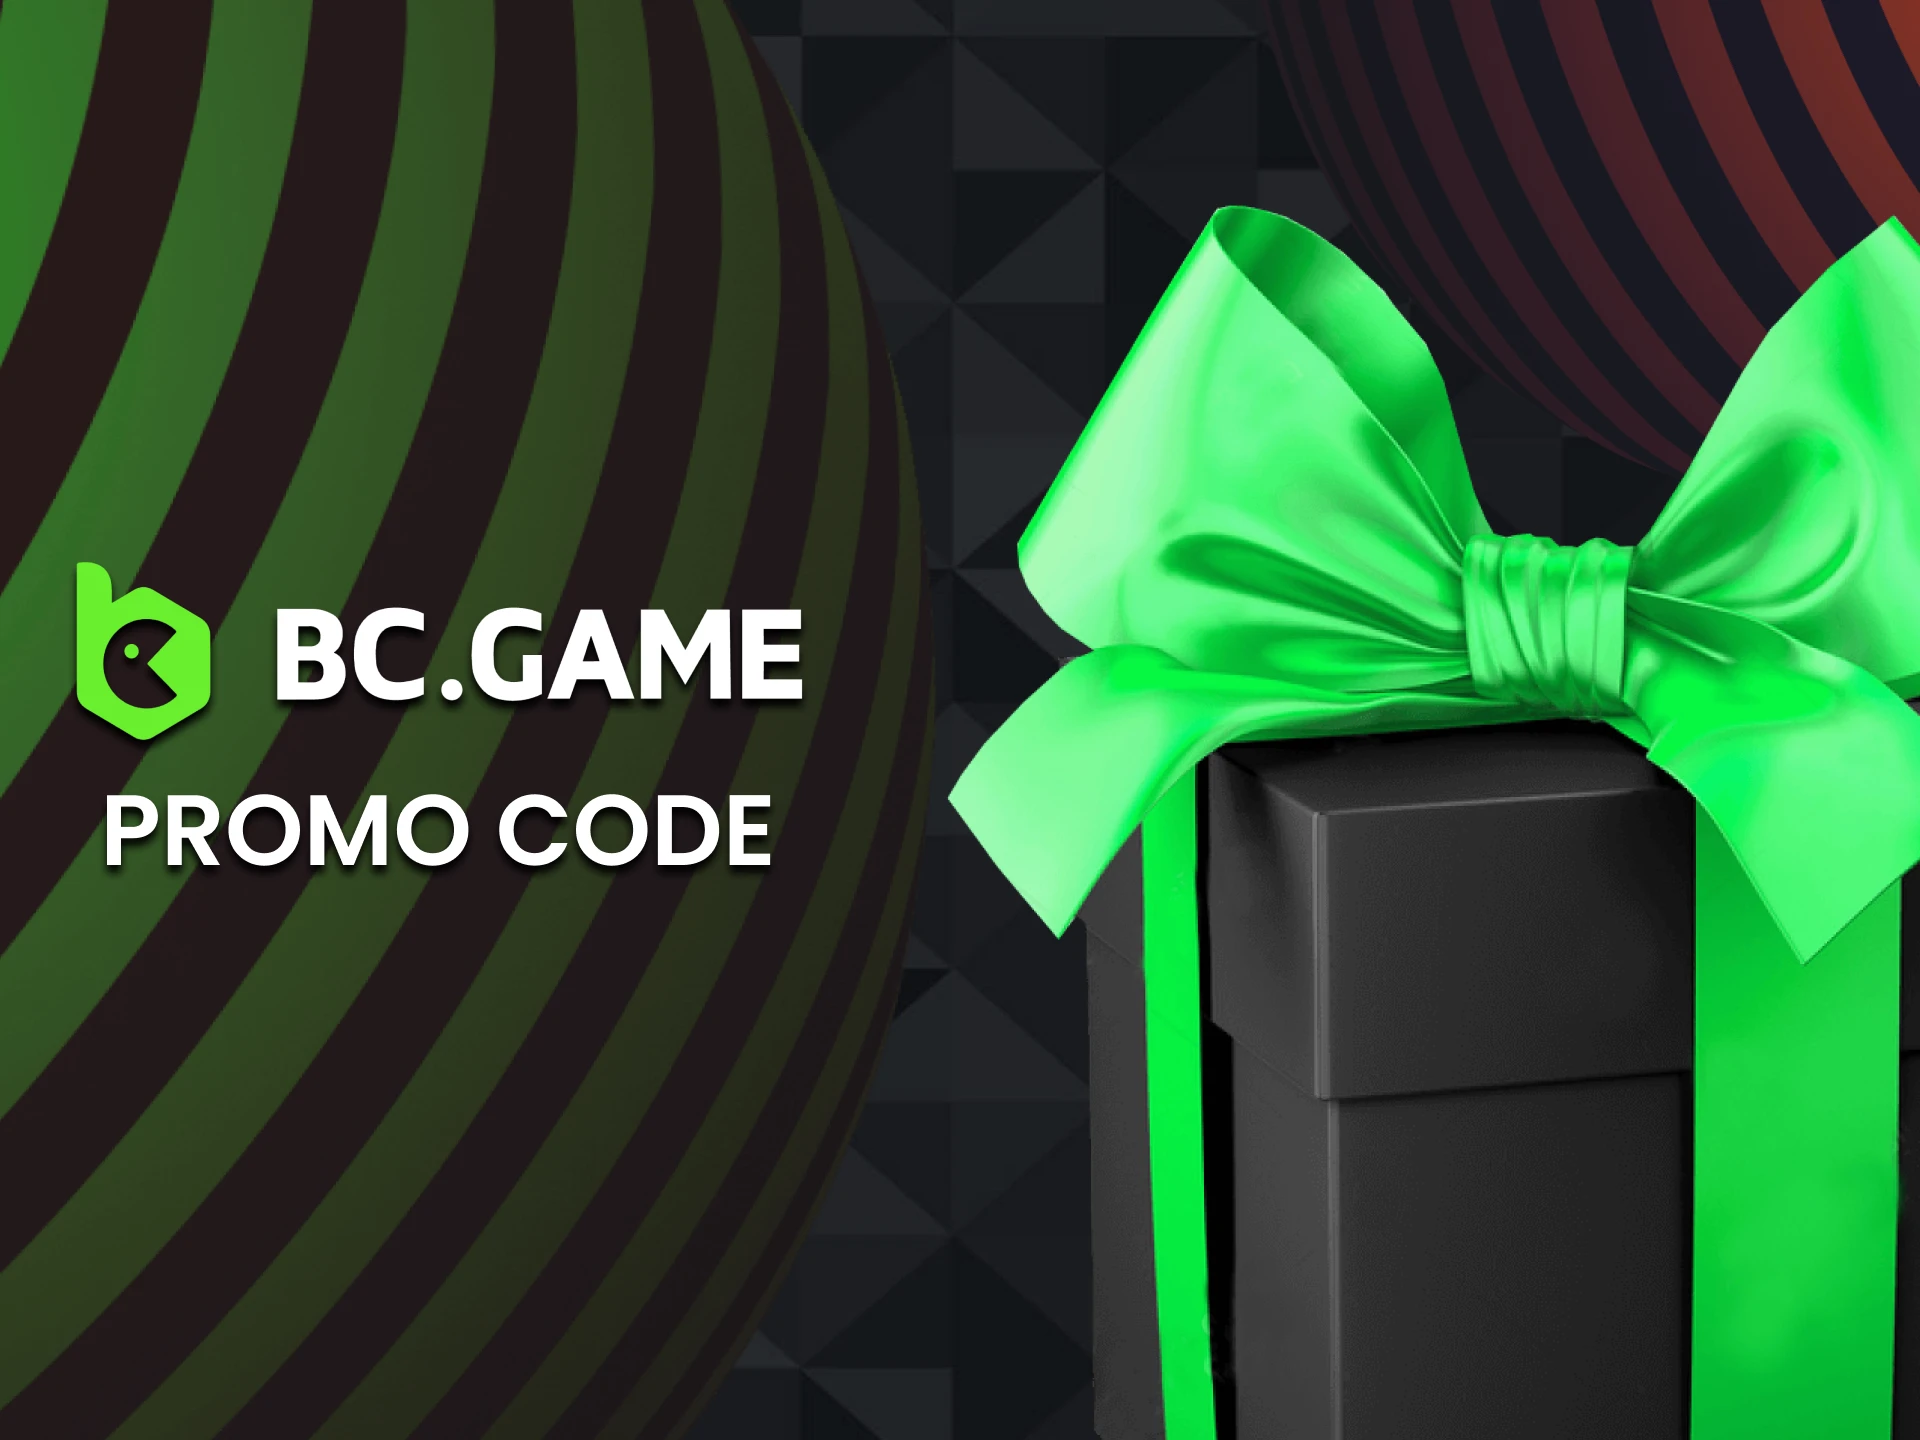 Enter the promo code in the BC Game application to get a bonus.